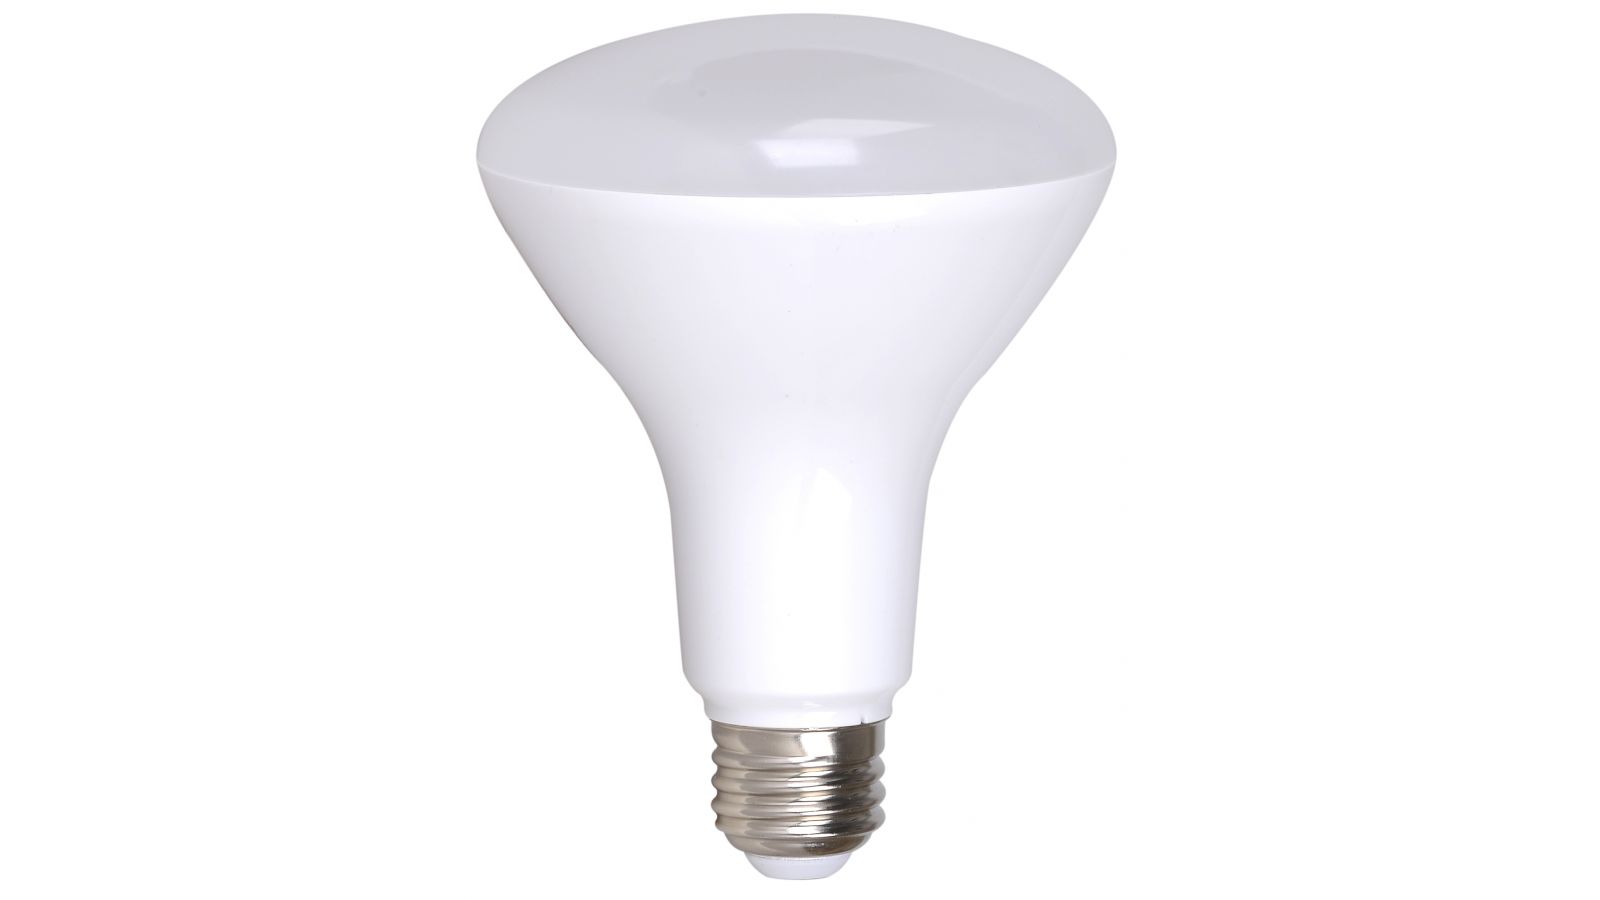 LED Dim-to-Warm BR30 Lamp